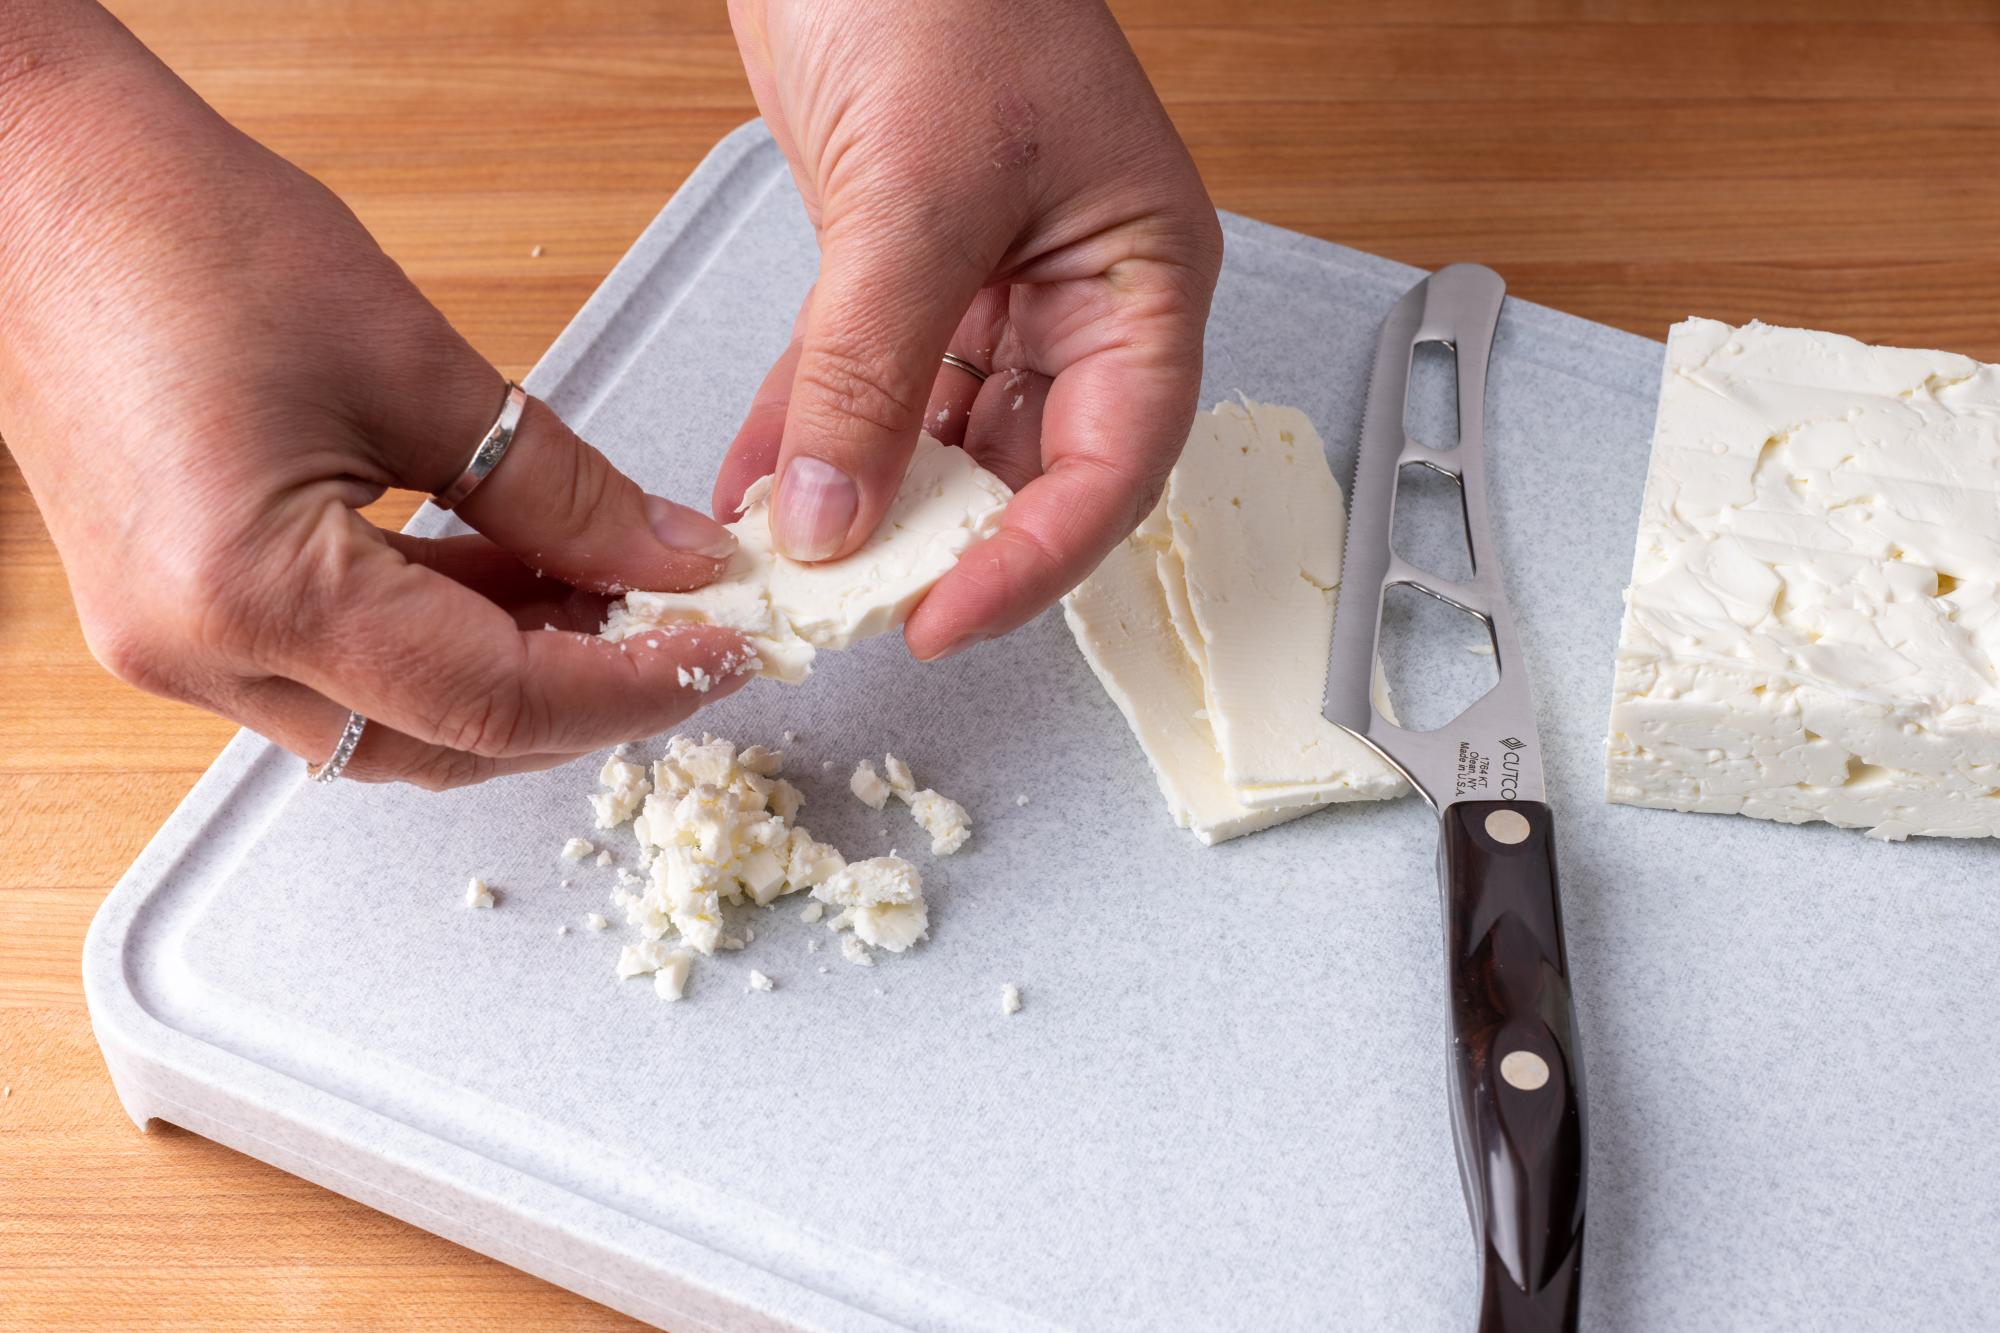 The Traditional Cheese knife was used to cut planks of feta cheese.